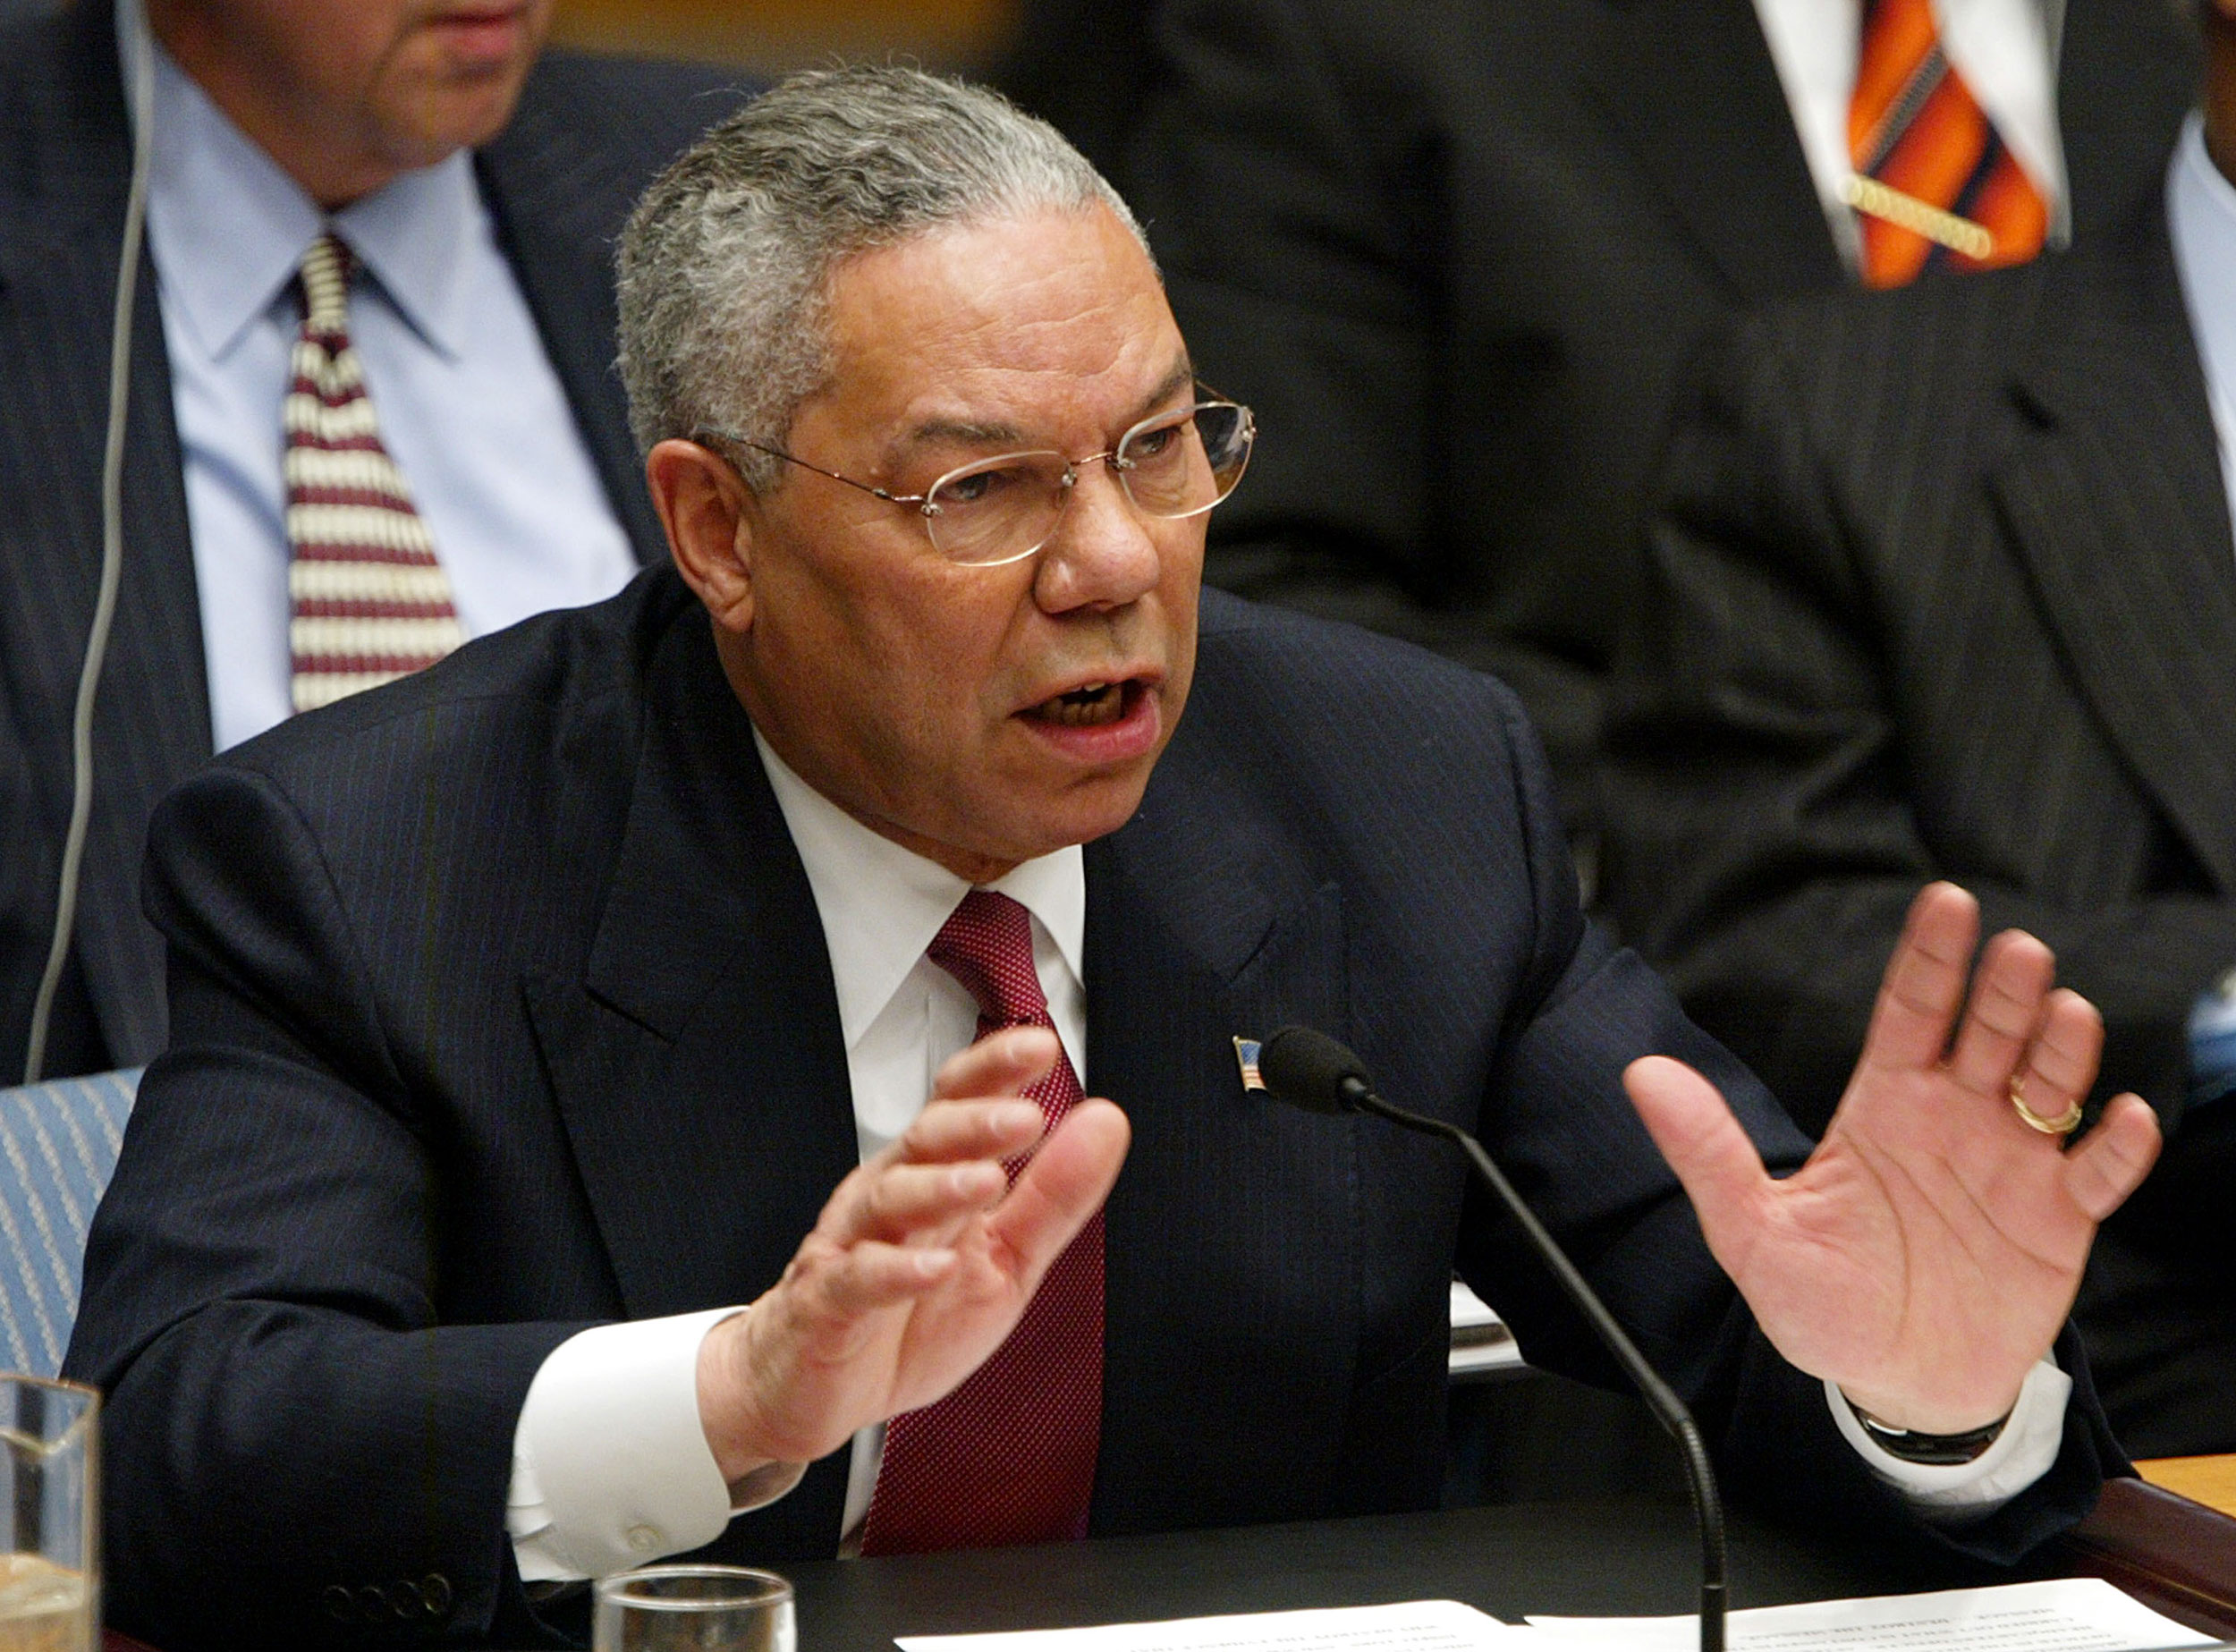 Colin Powell addresses the United Nations Security Council on February 5, 2003, to present the United States’ case against Iraq under UN Resolution 1441 regarding weapons of mass destruction.